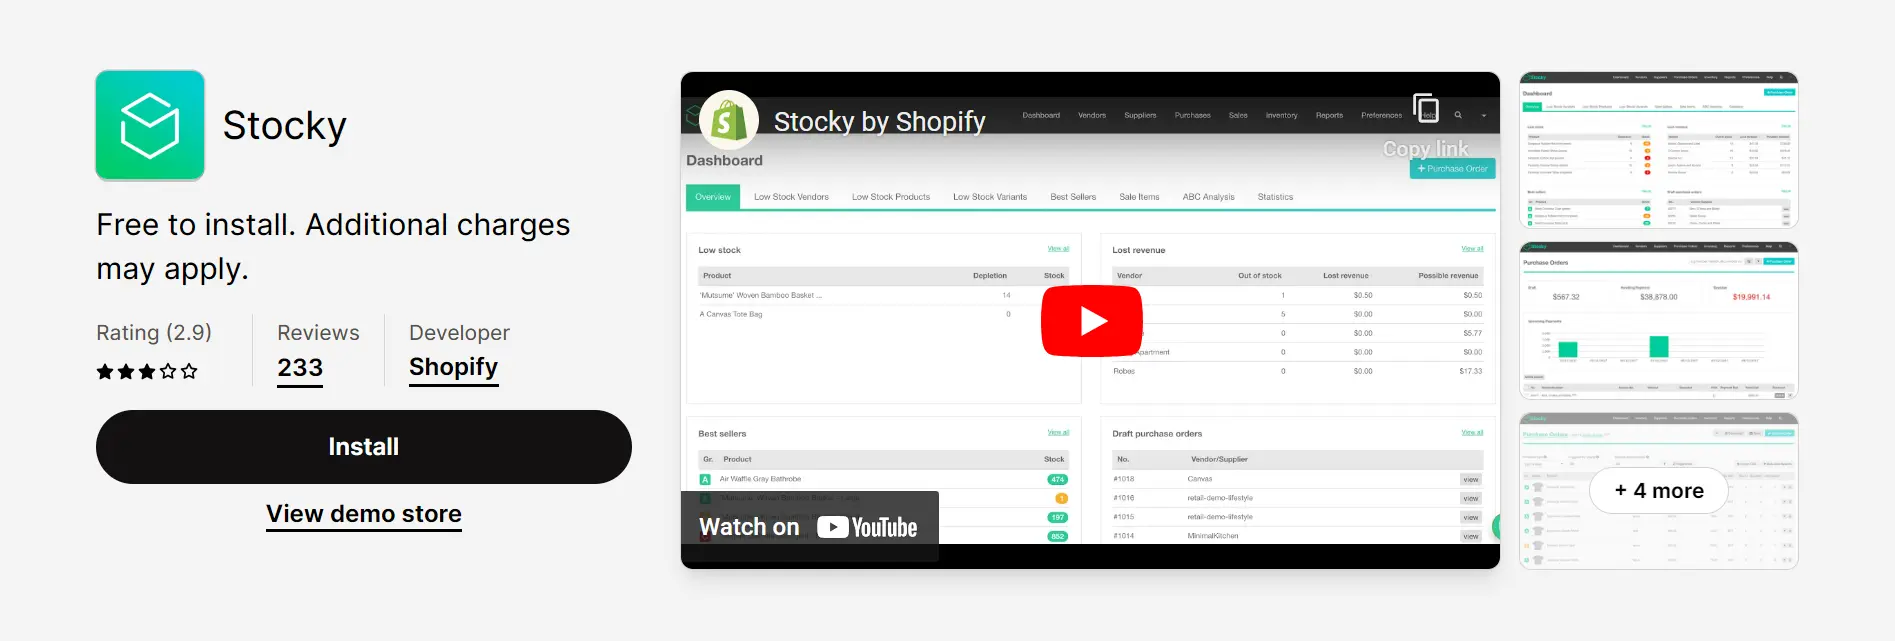 stocky inventory tracking app for shopify